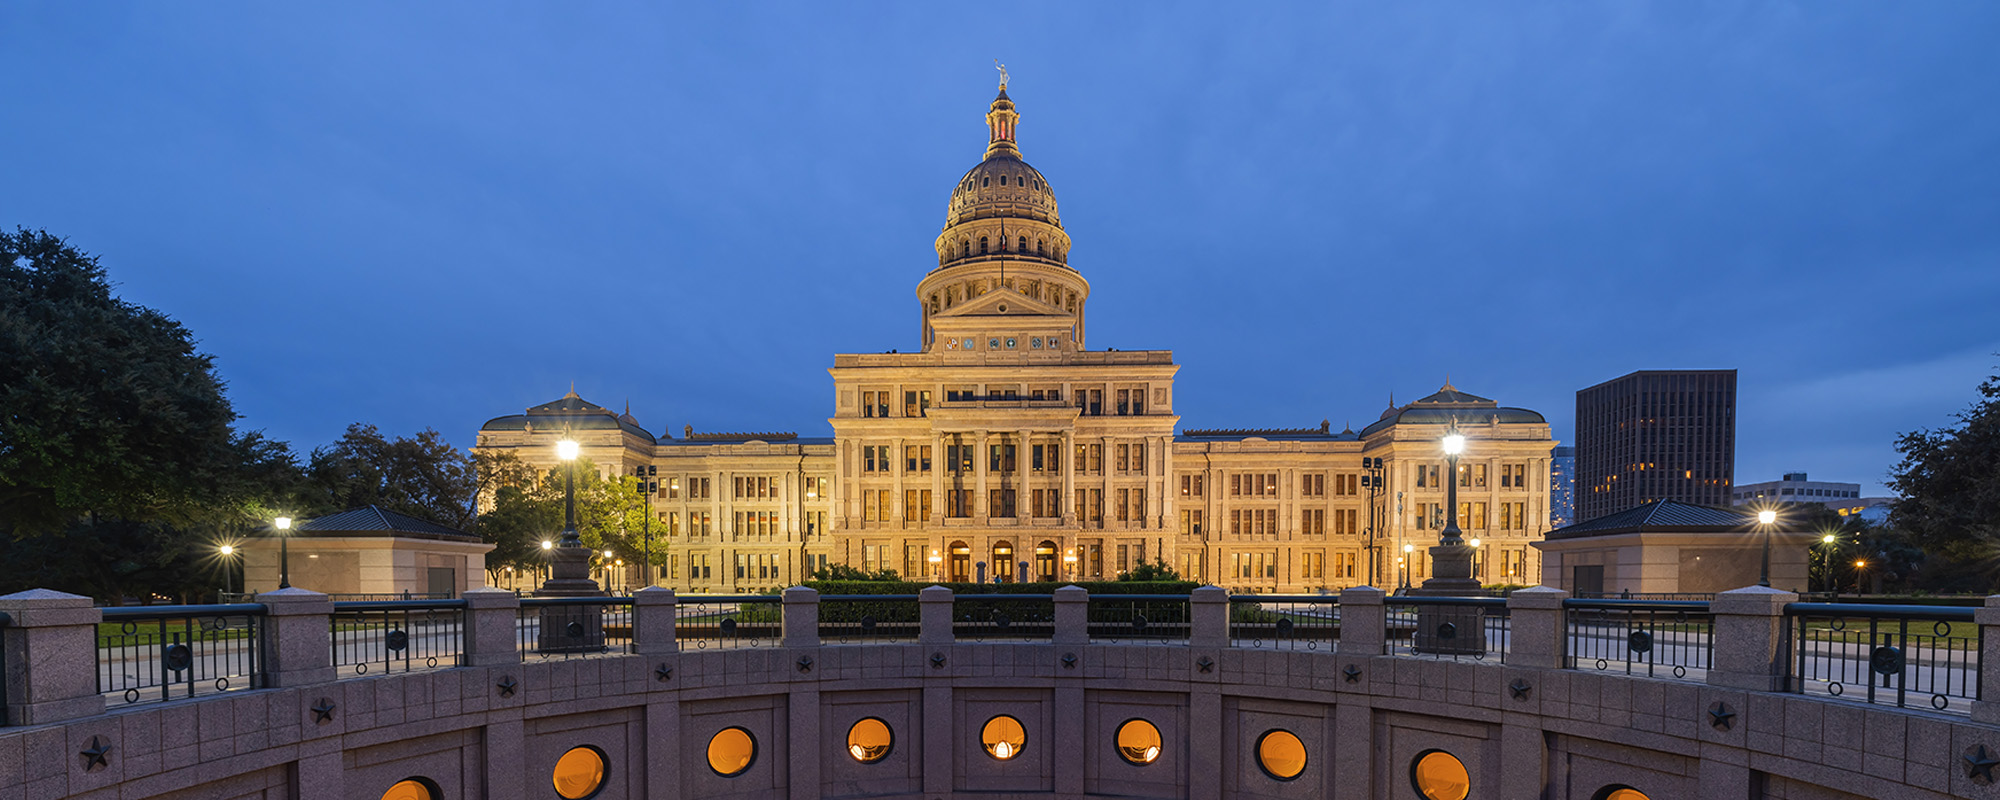 twilight view of texas capitol